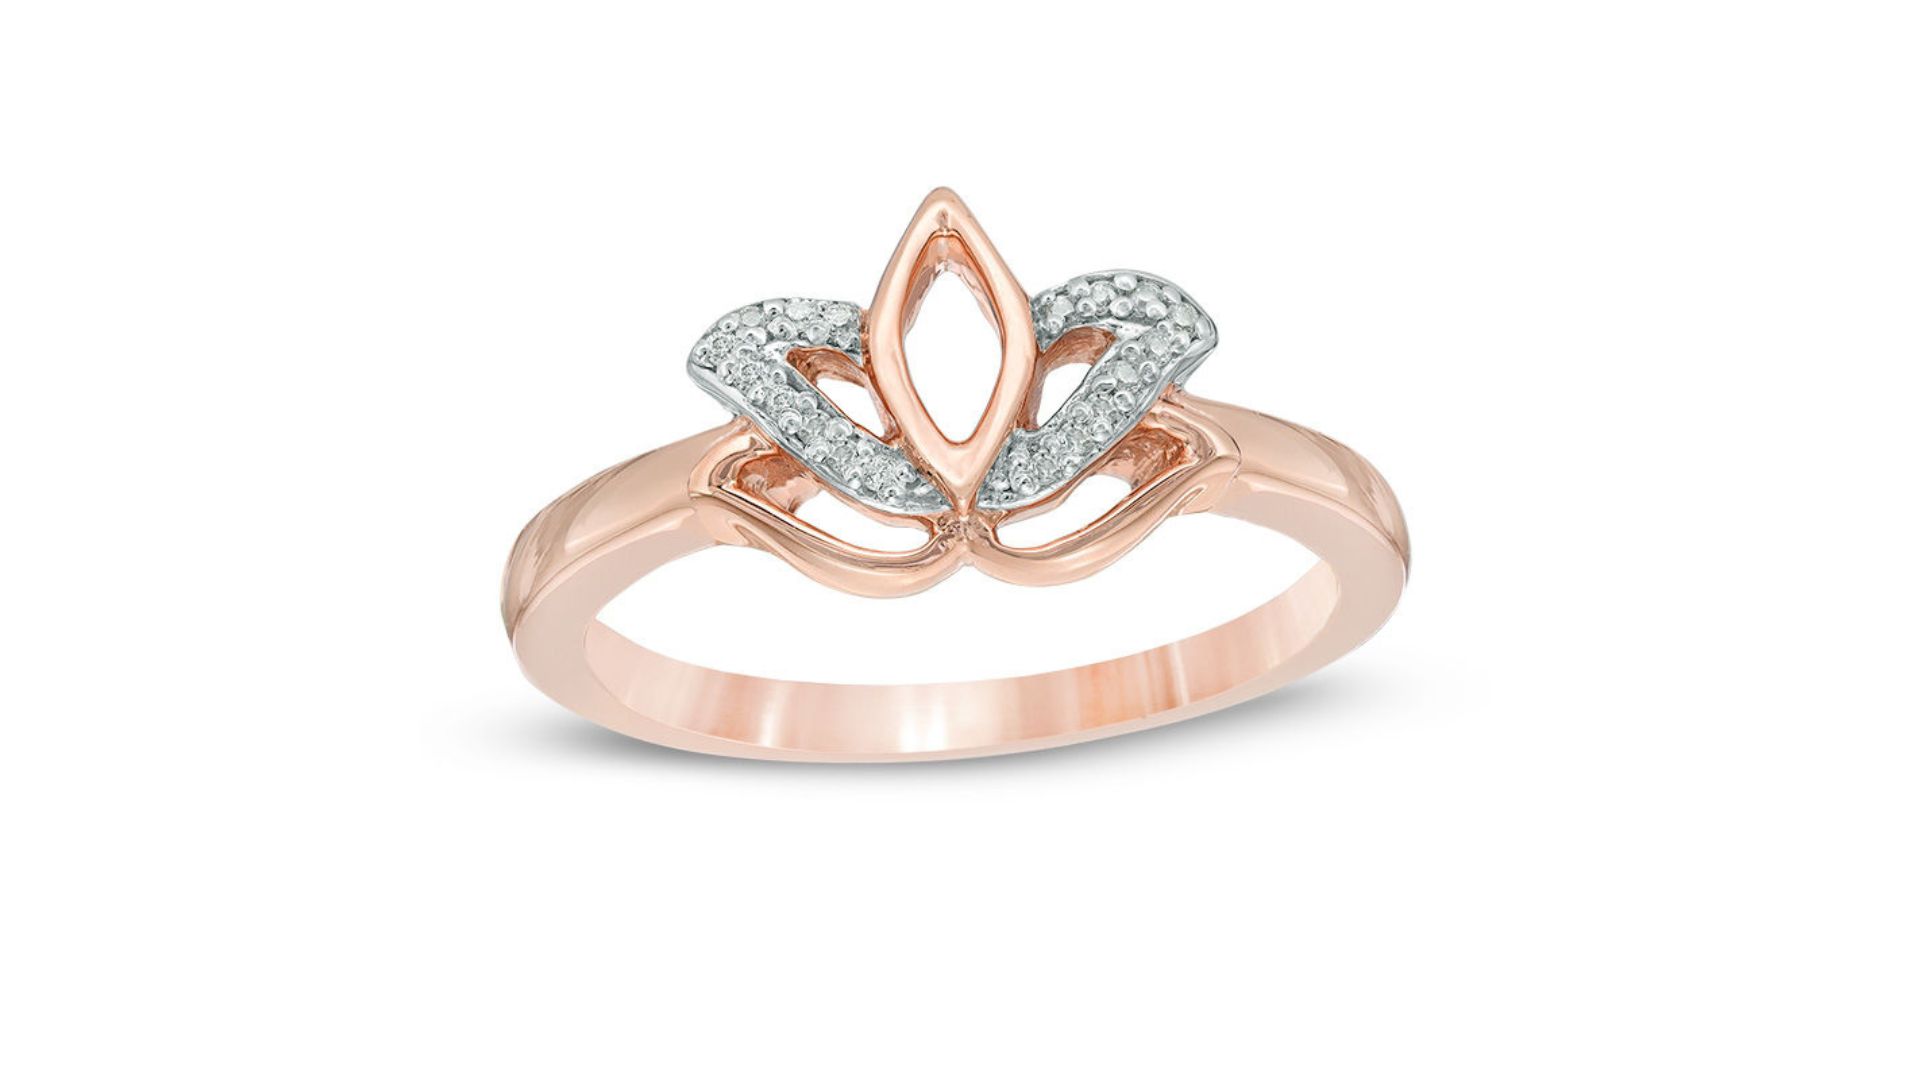 Lotus Flower Rings - A Symbol Of Spiritual Growth And Beauty